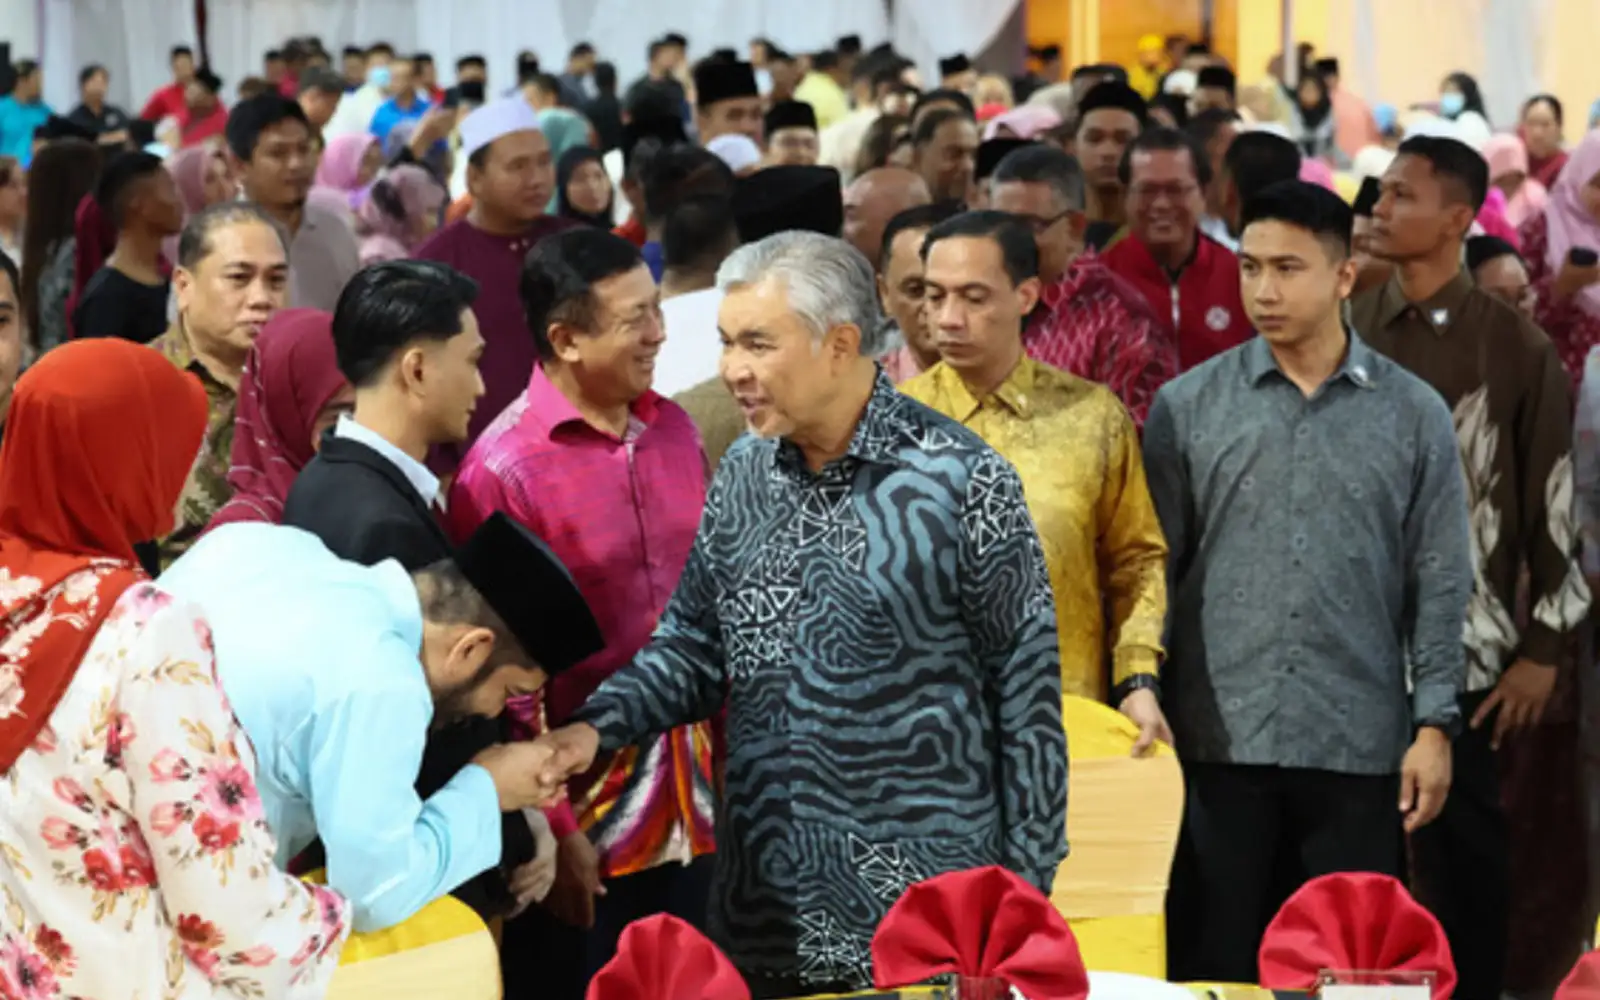 umno a national party, not a malayan one, says zahid